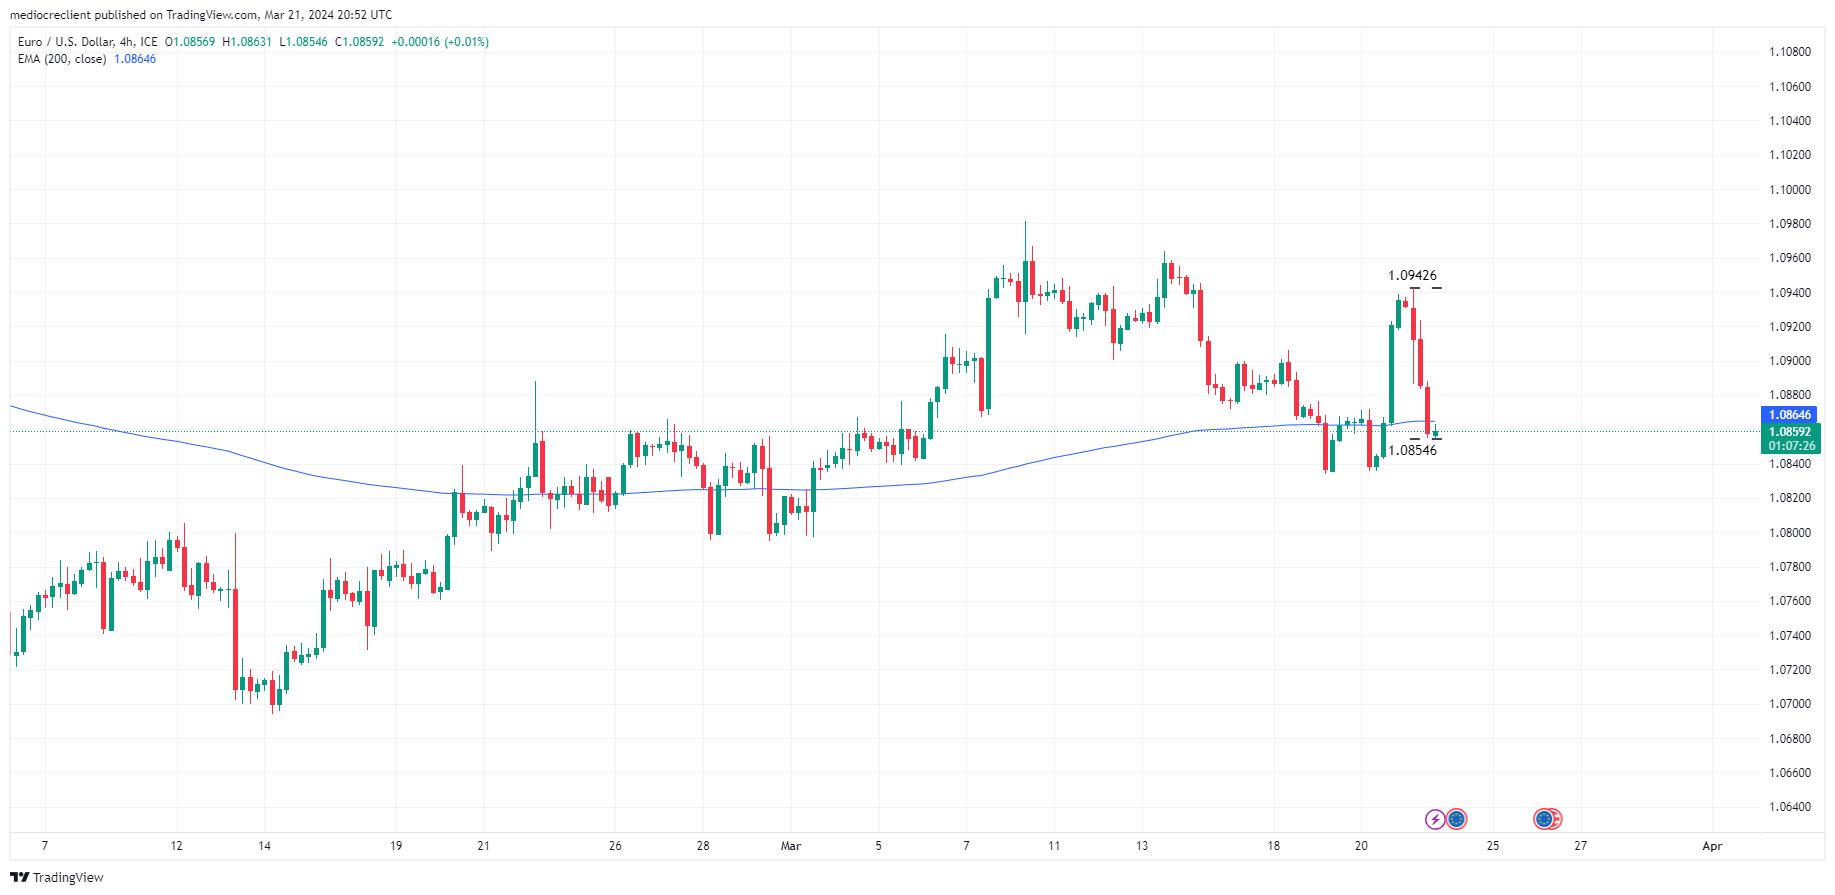 EUR/USD plunges back into familiar consolidation levels on Thursday after short-lived rally